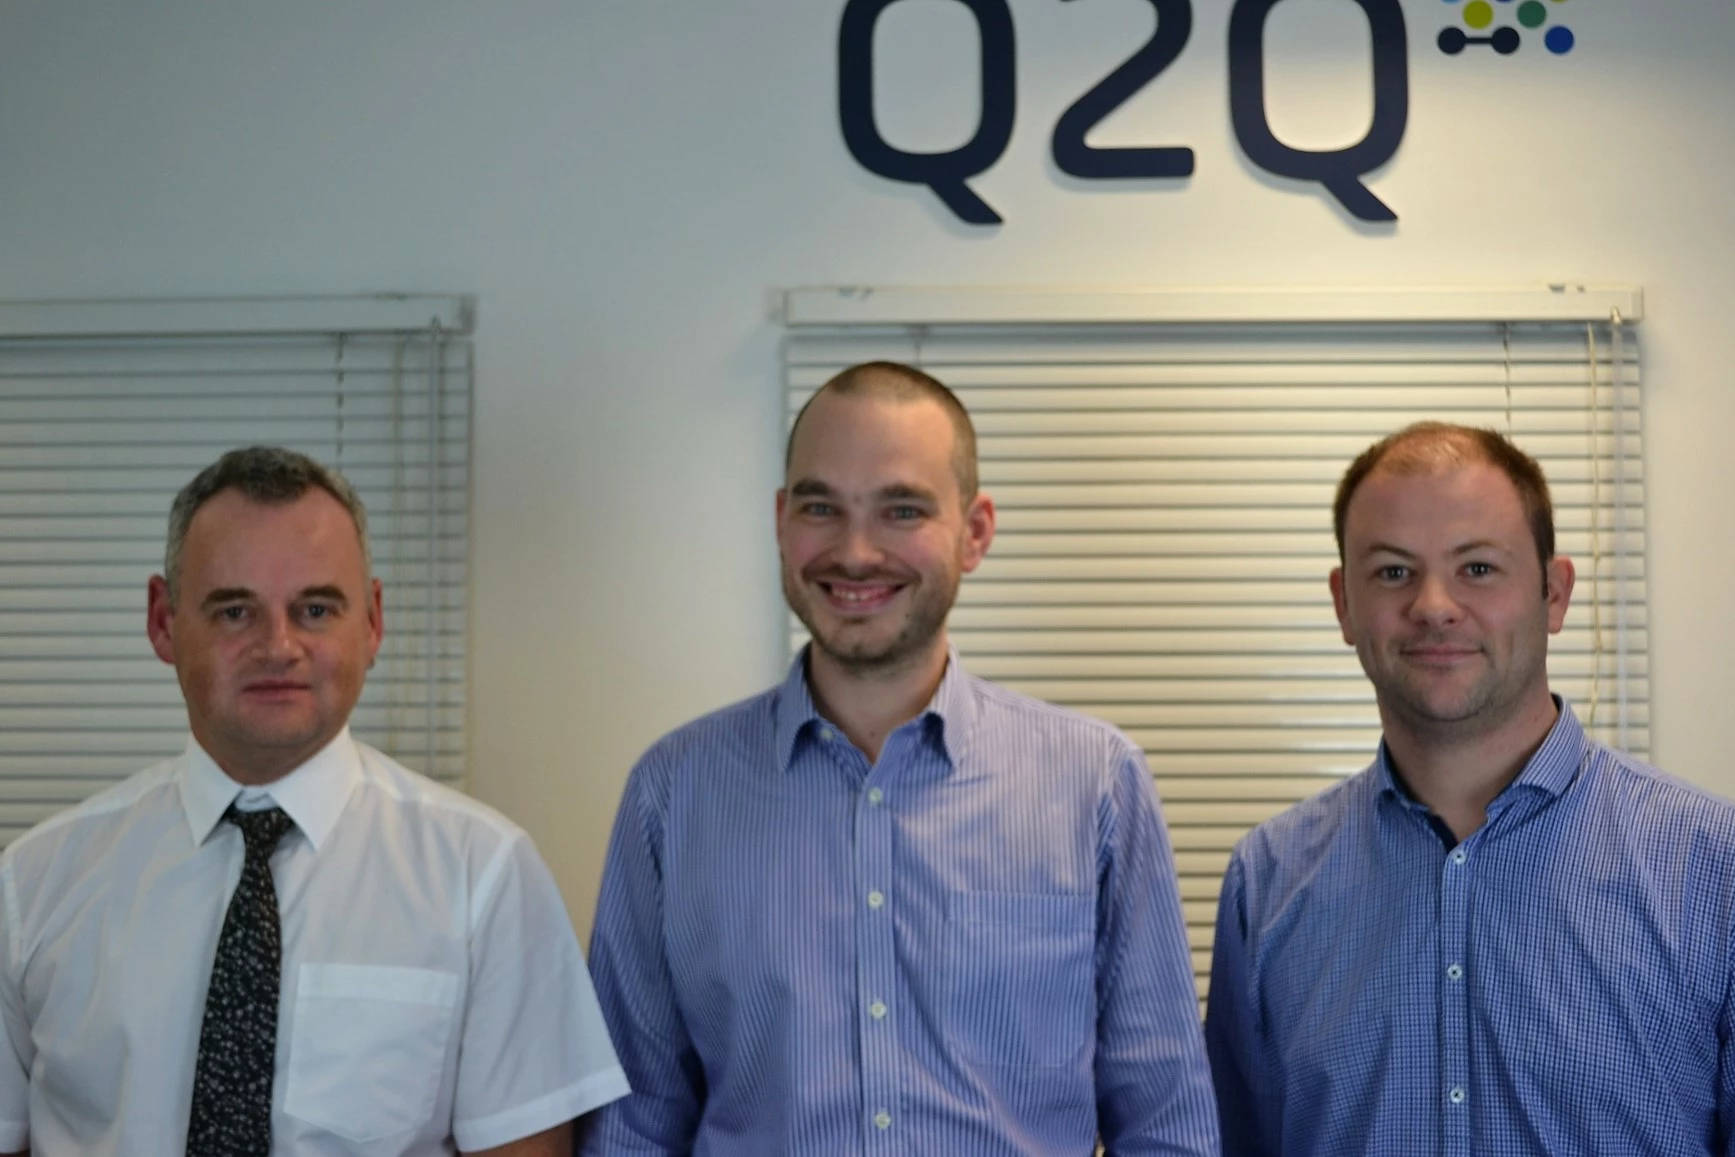 Q2Q IT boosts technical team with two new hires